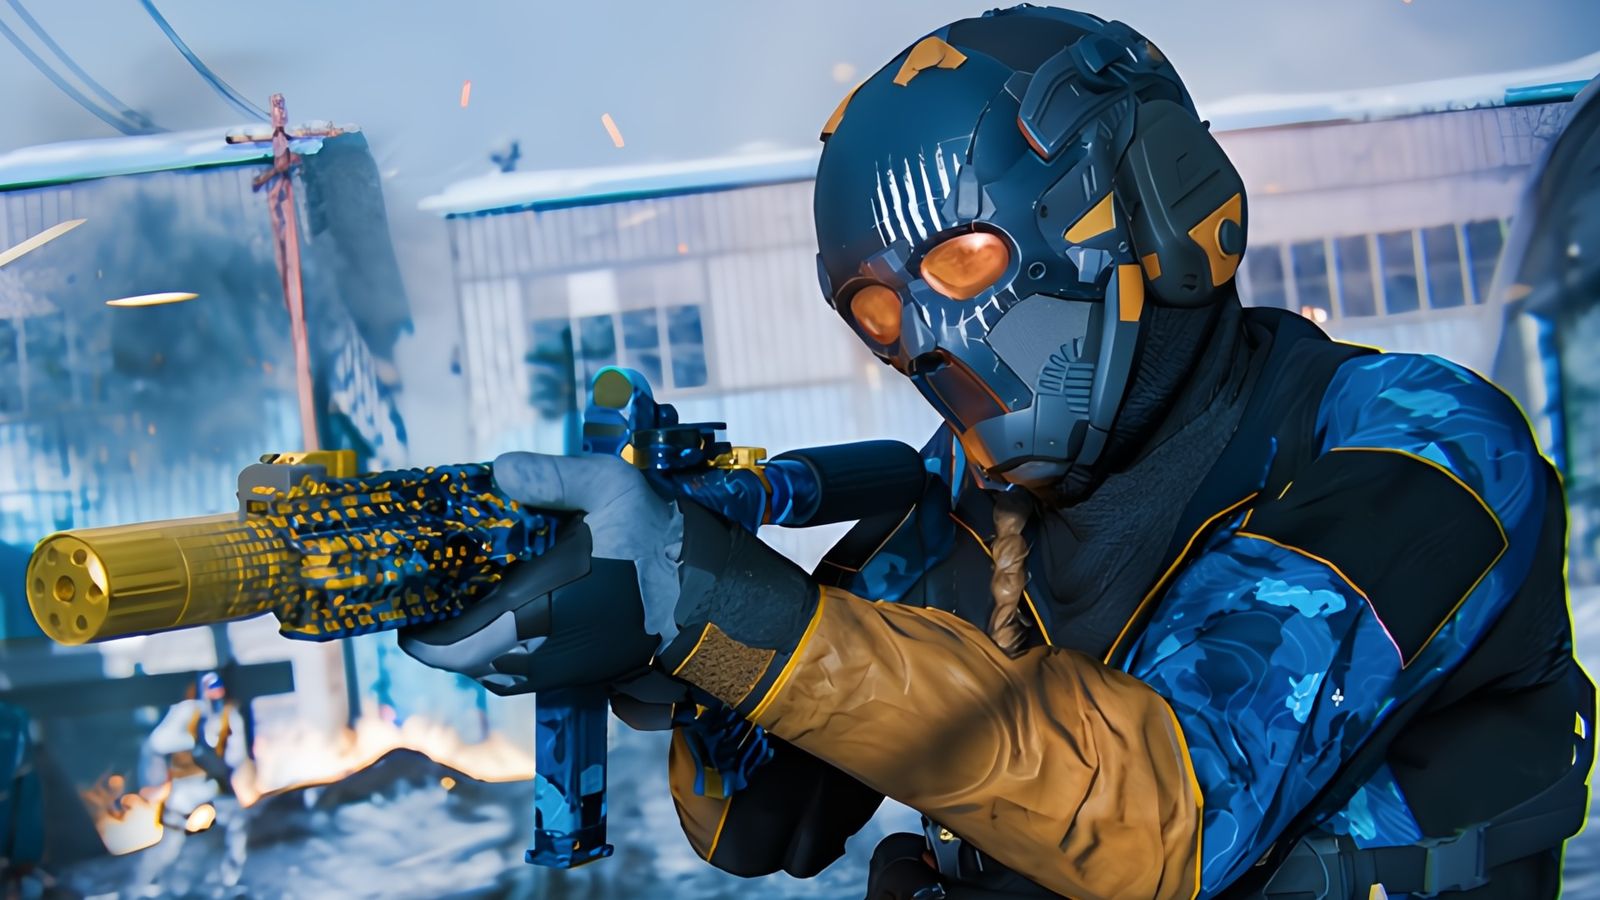 Call of Duty character wearing yellow and blue tactical gear